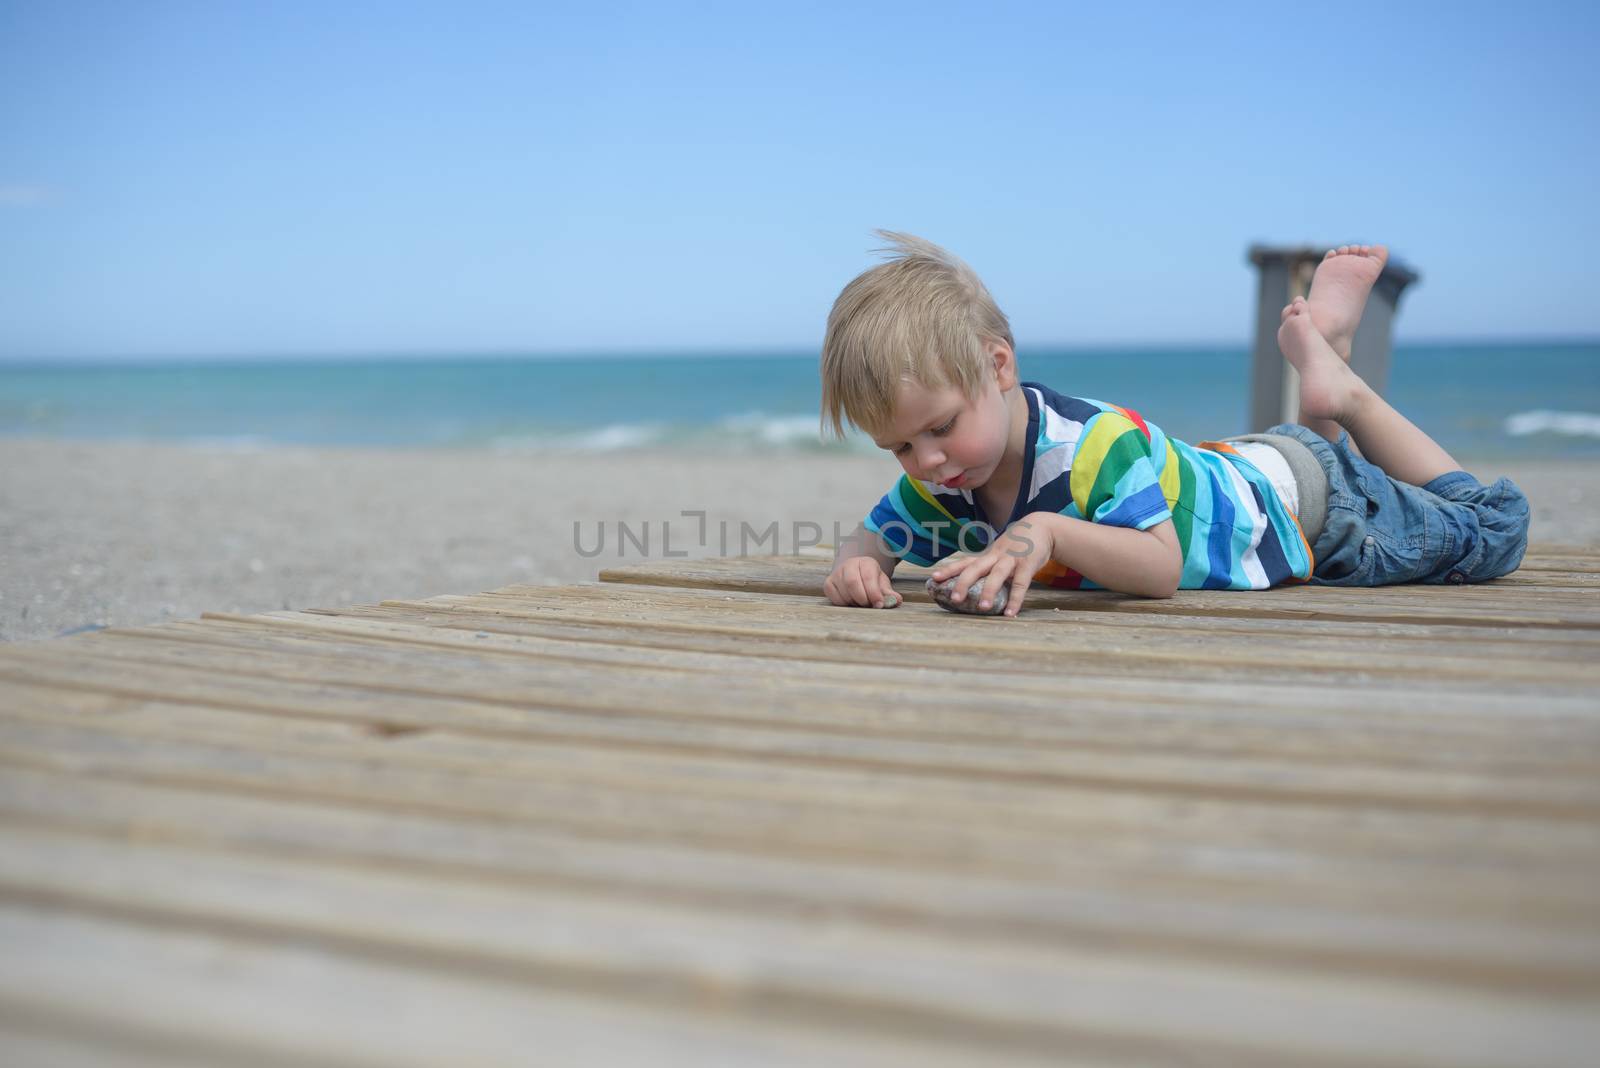 Small boy resting on a wooden walkway on the beach